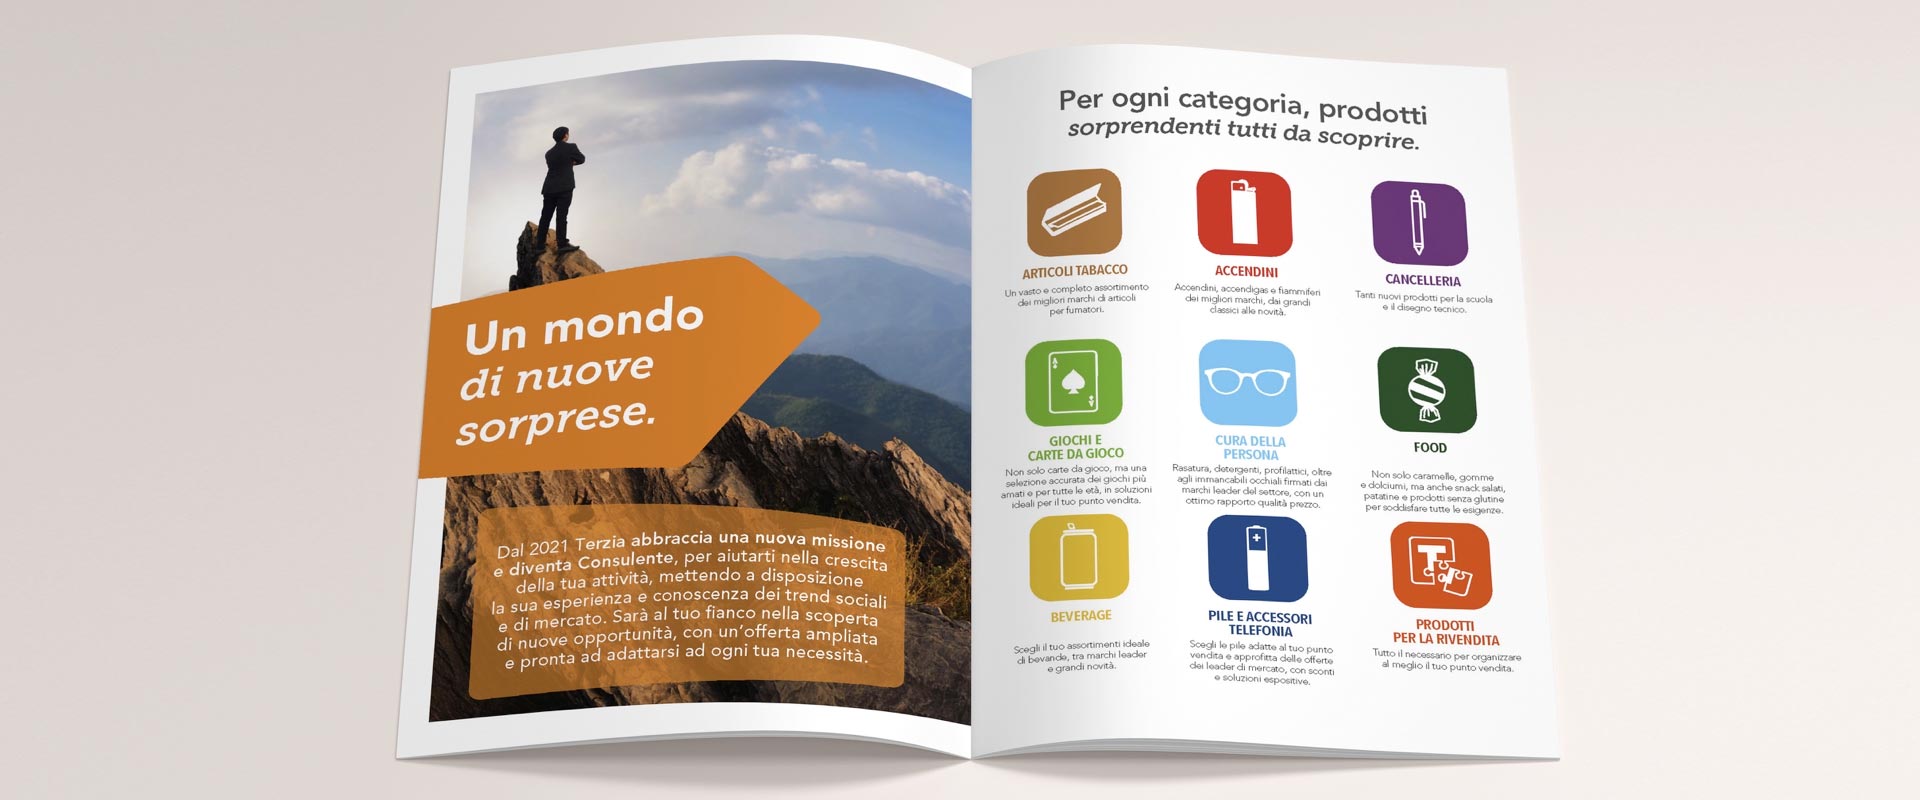 Terzia product categories in new catalog